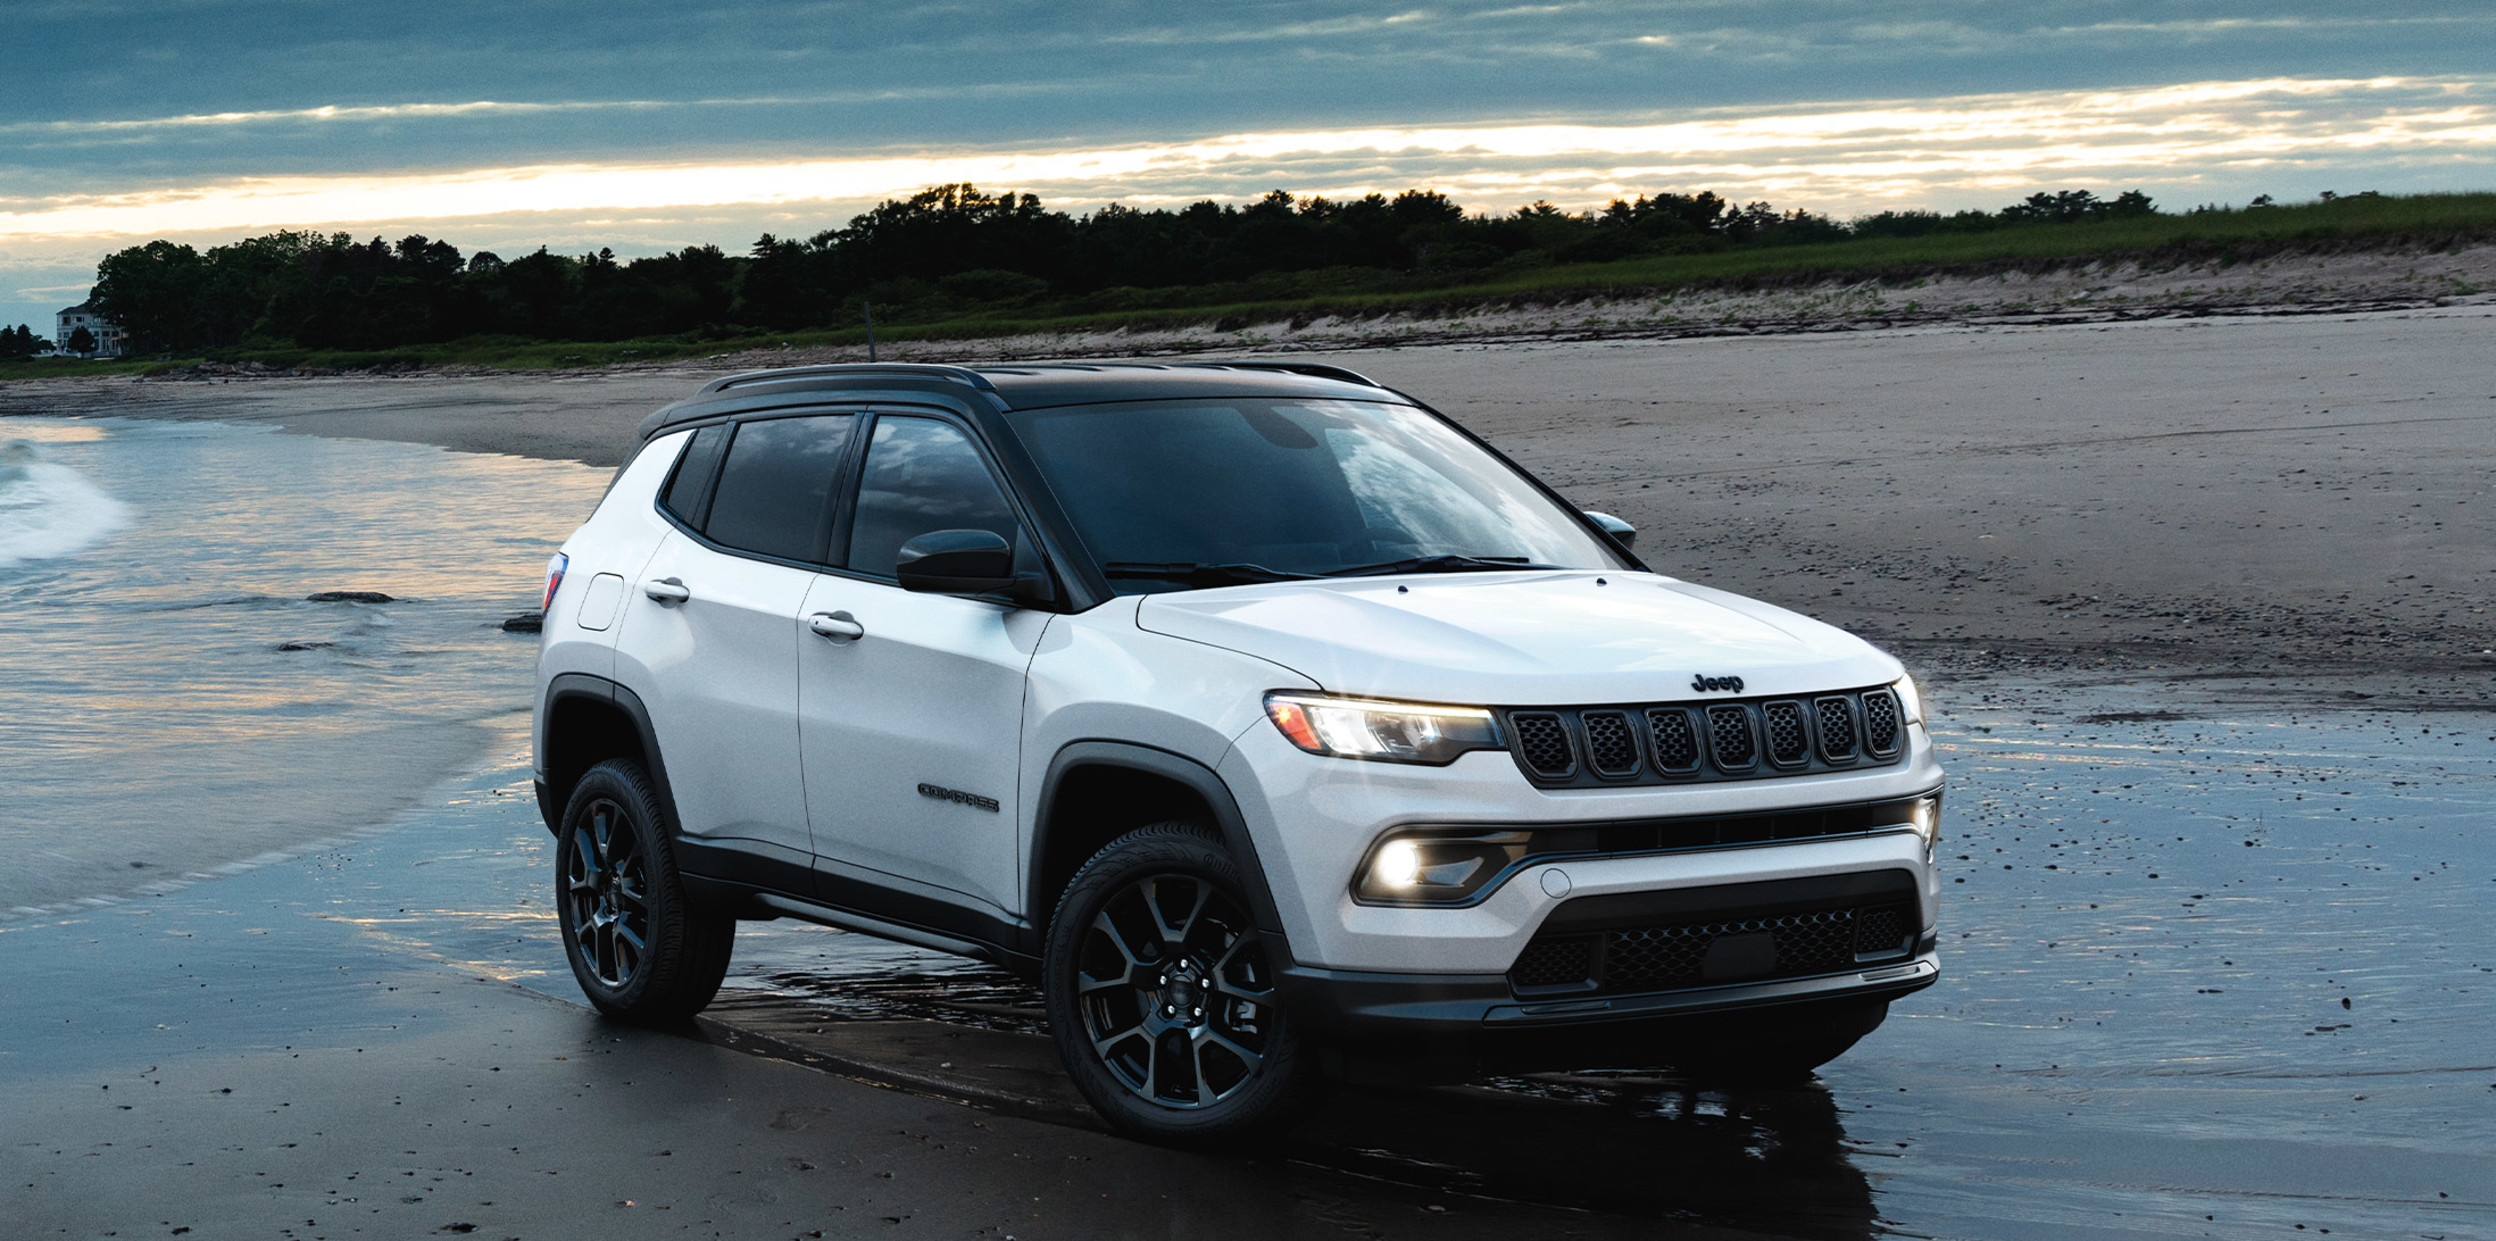 The 2023 Jeep Compass